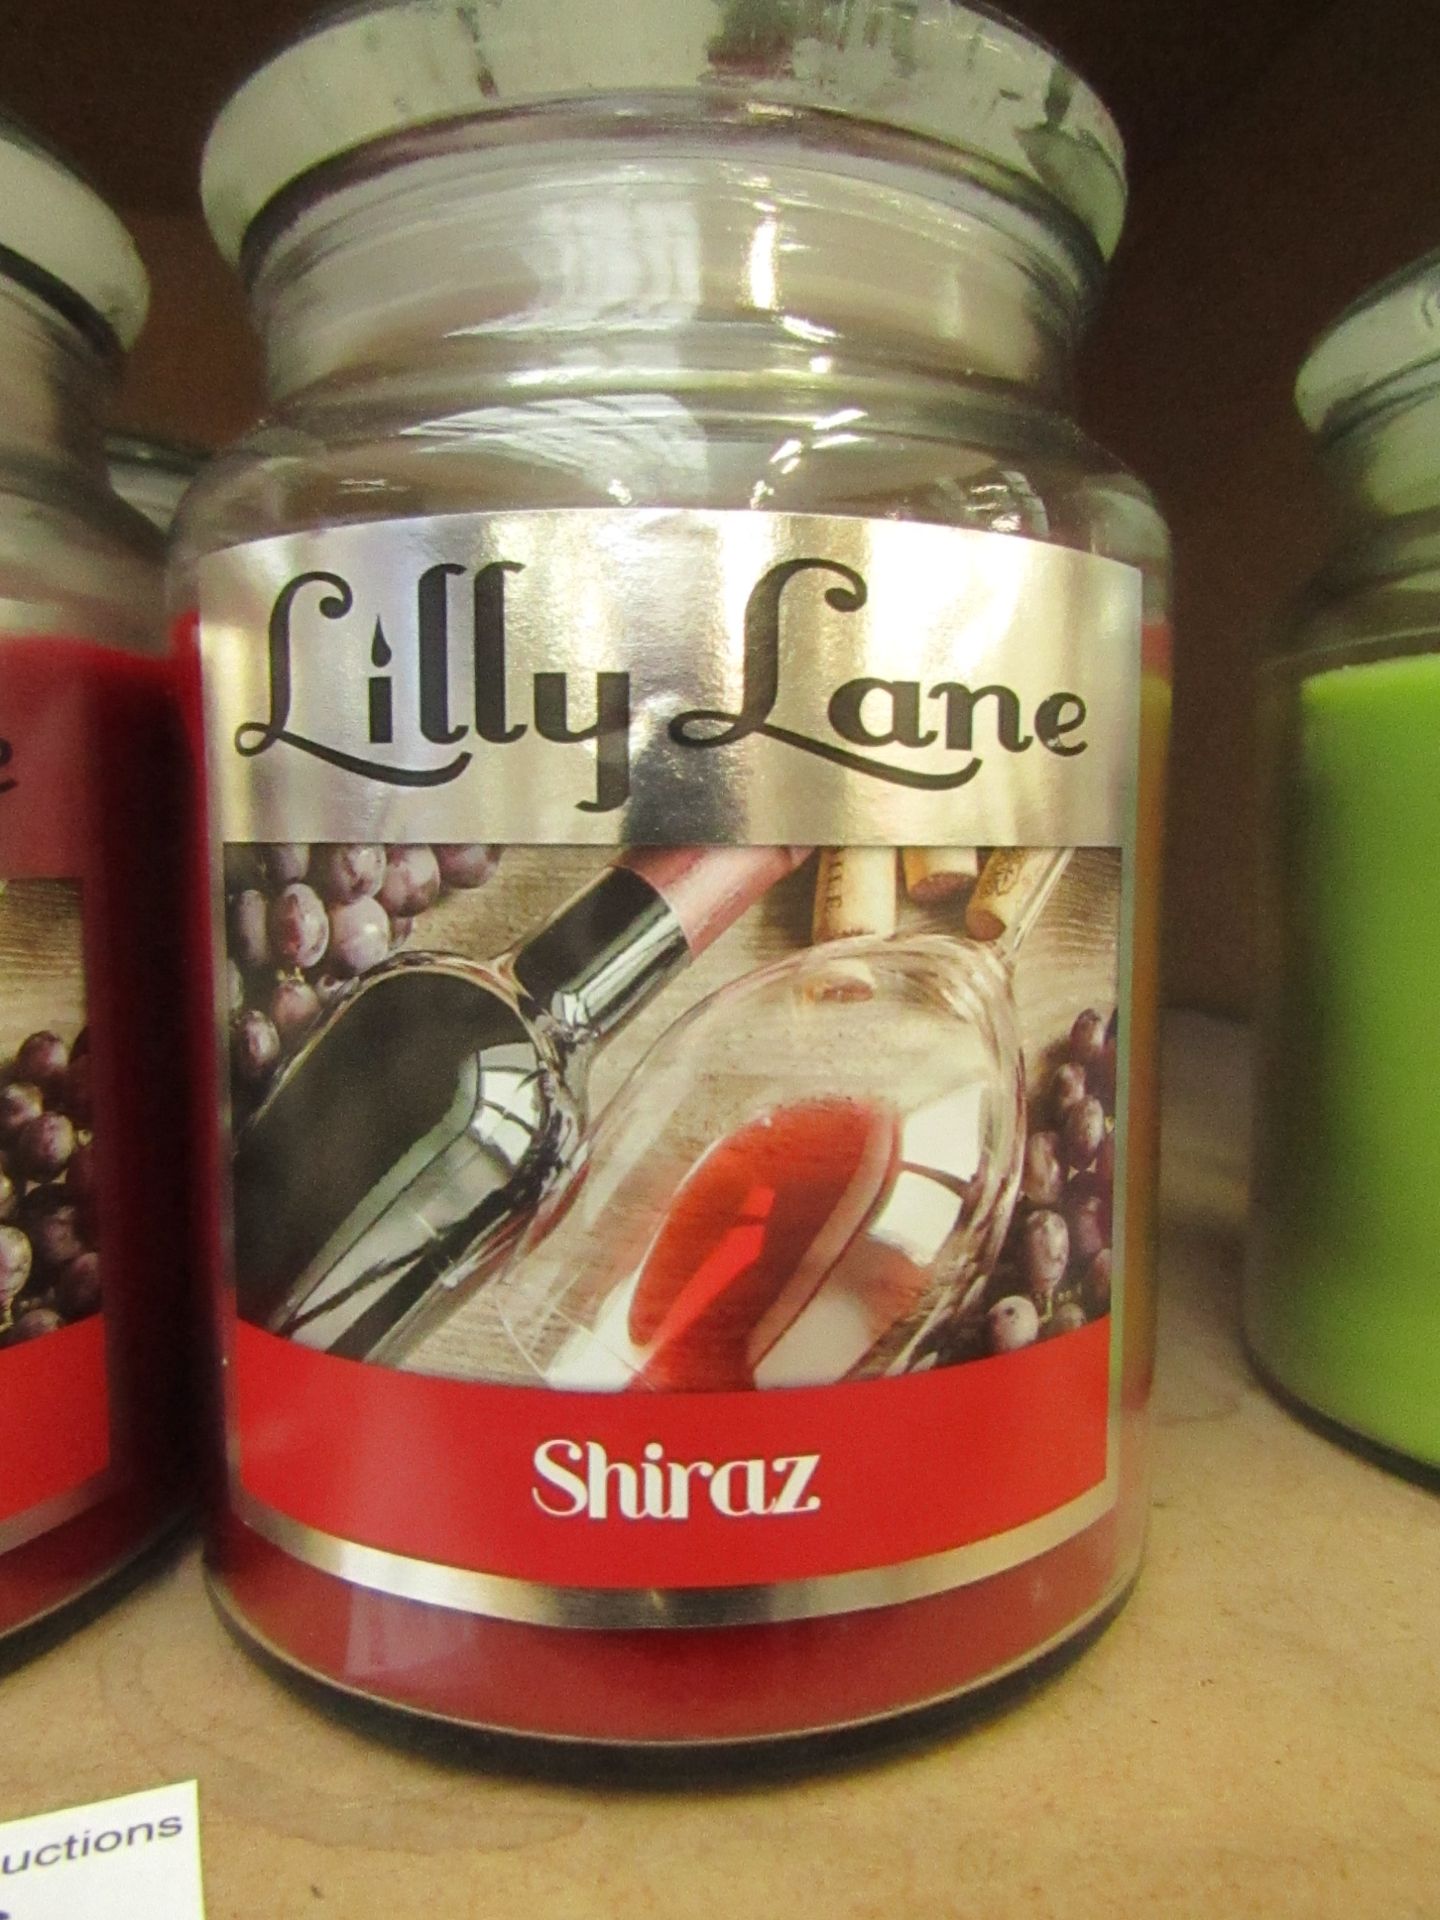 Lilly Lane - Shiraz Scented Candle, new.